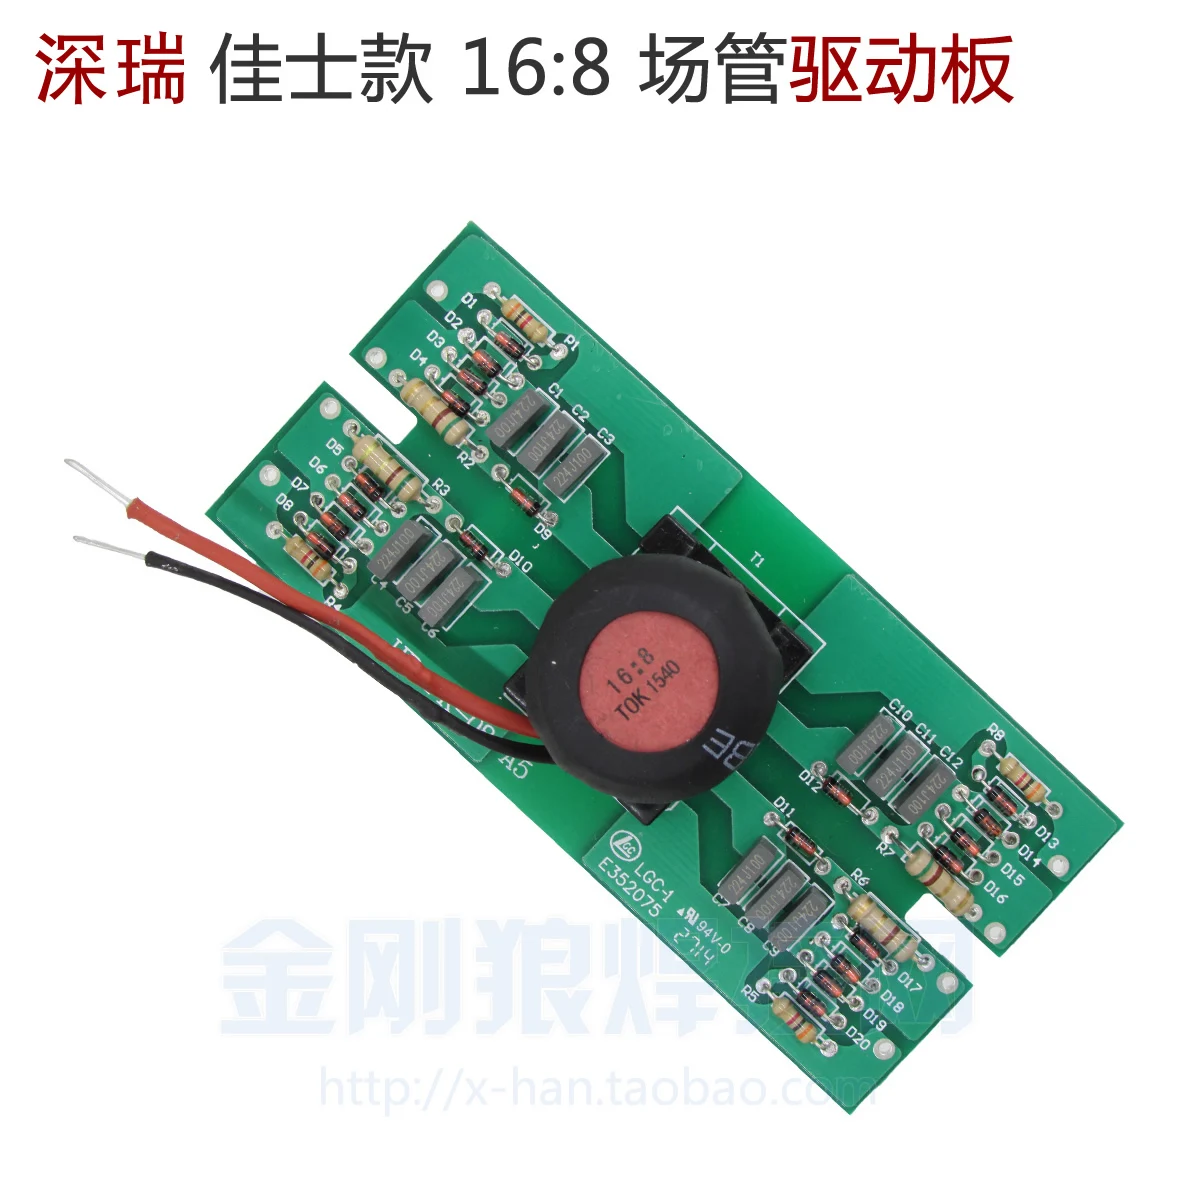 

Driver Board 16:8 Trigger Board of Shenrui MOS Transistor Inverter Welding Machine Is Suitable for 250A 300A 400A